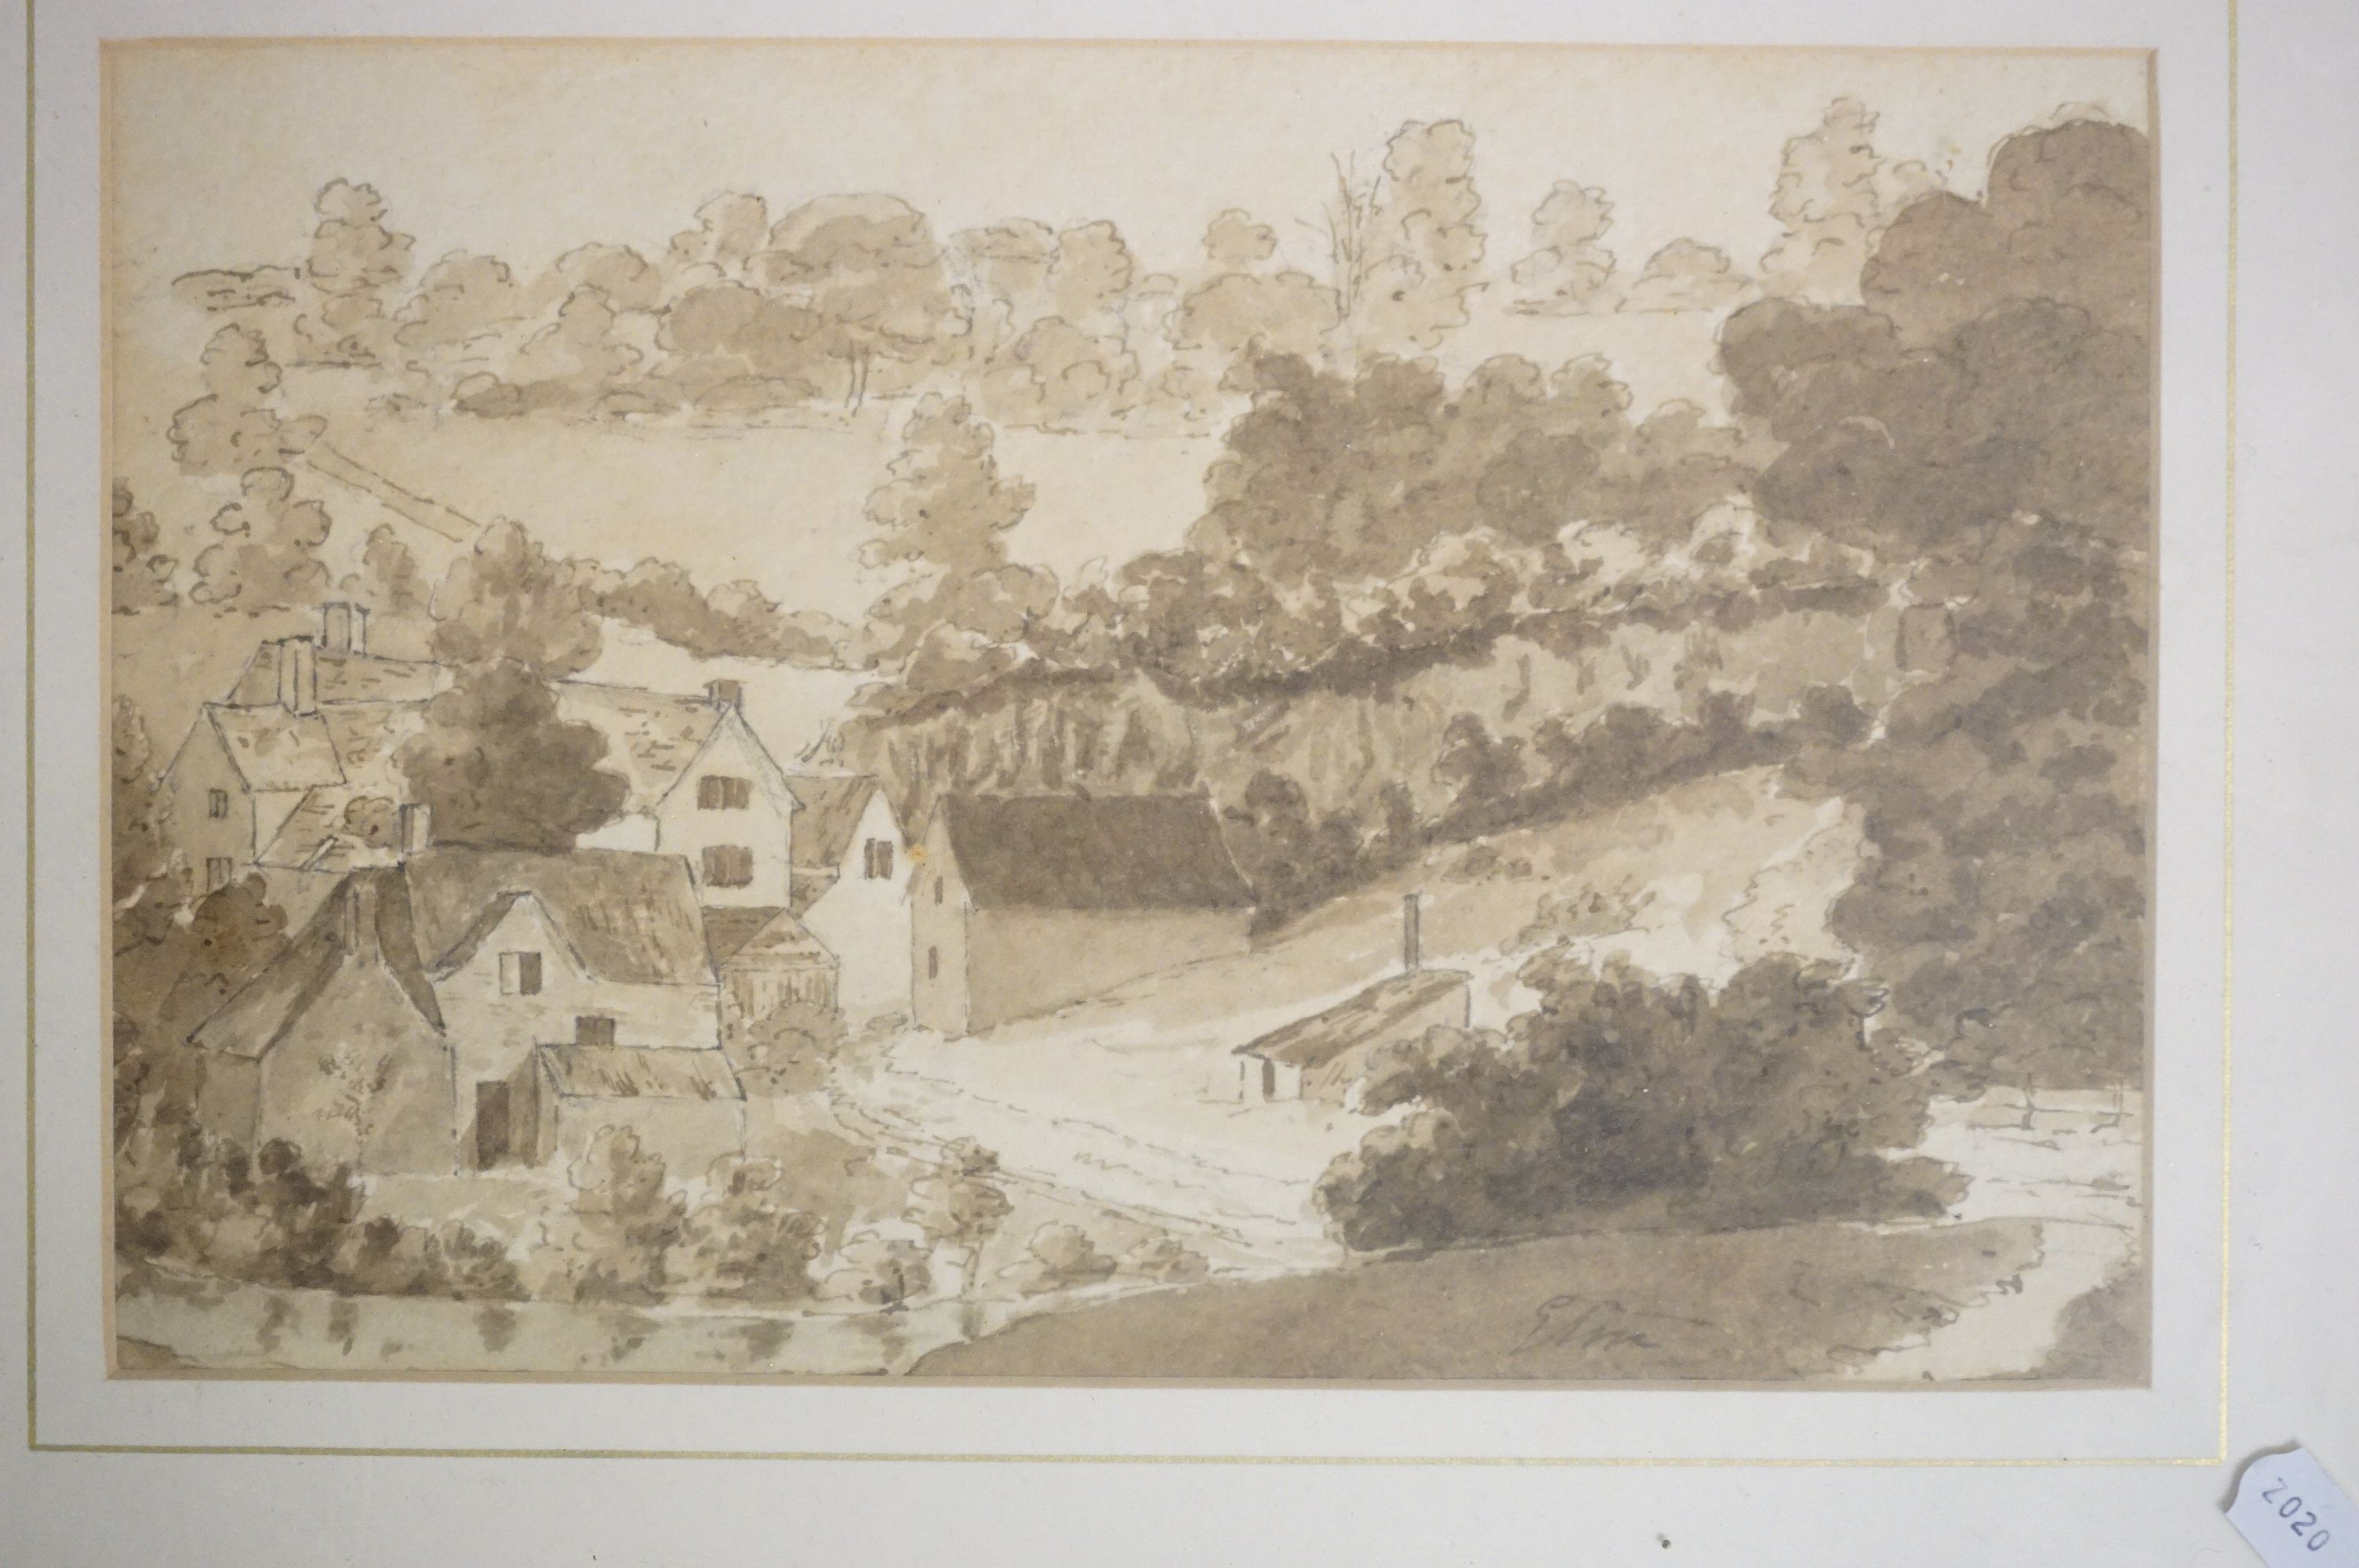 Five 19th / Early 20th century Landscape Sepia Watercolours and Prints, largest image 23cm x 30cm, - Image 5 of 6